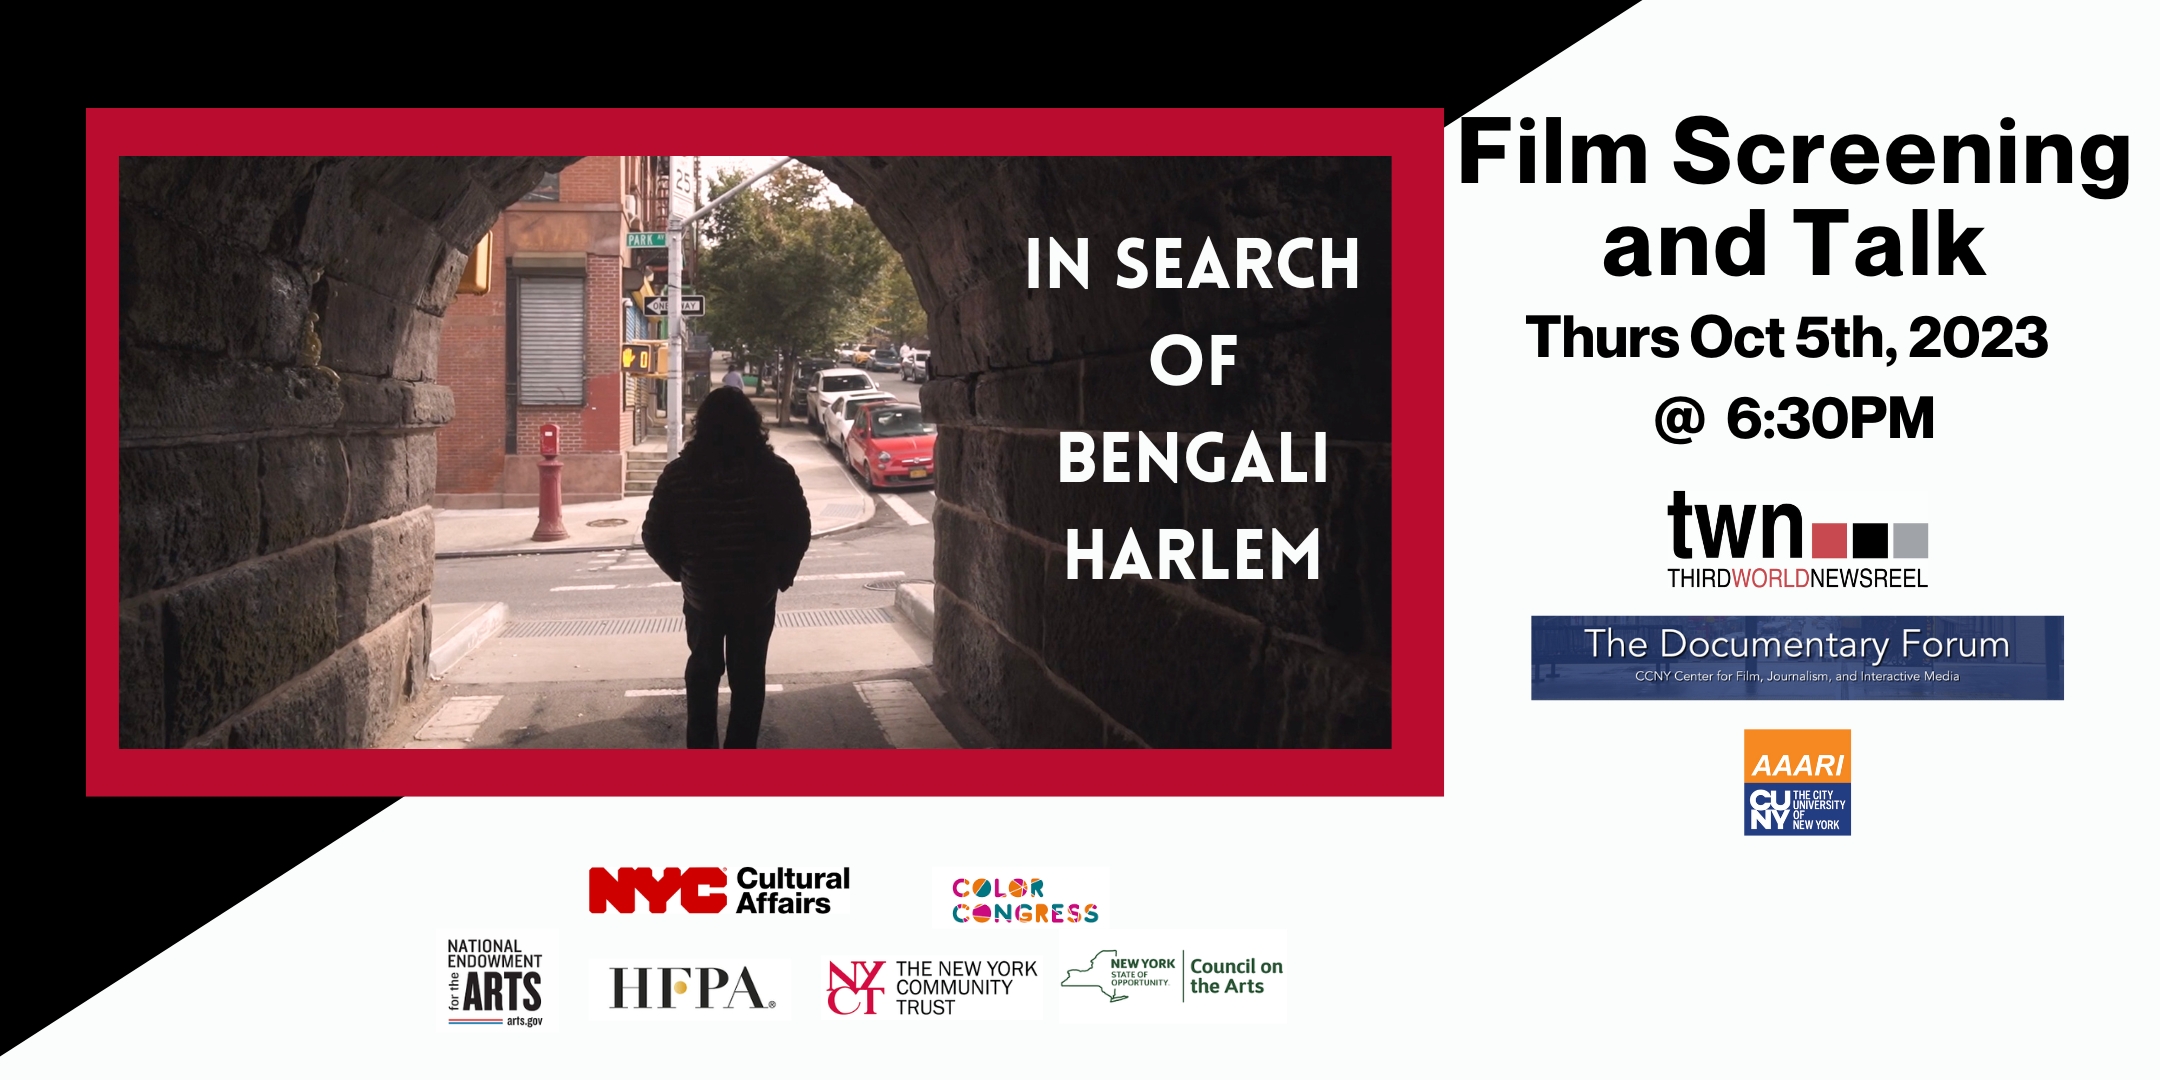 In search of bengali harlem poster